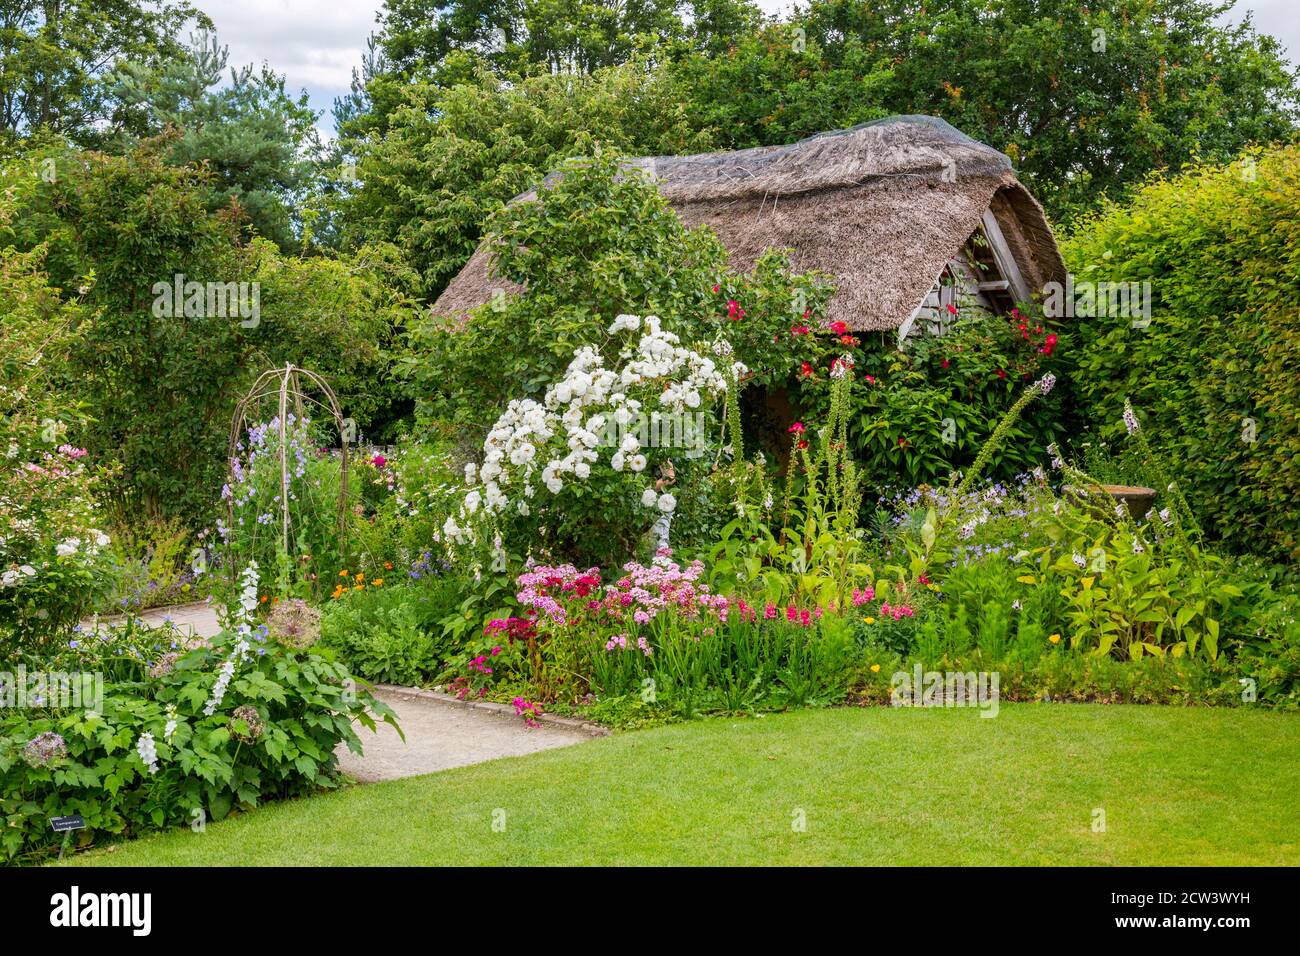 A colourful herbaceous border and thatched cottage in the Cottage Garden at RHS Rosemoor, Great Torrington, Devon, England, UK Stock Photo